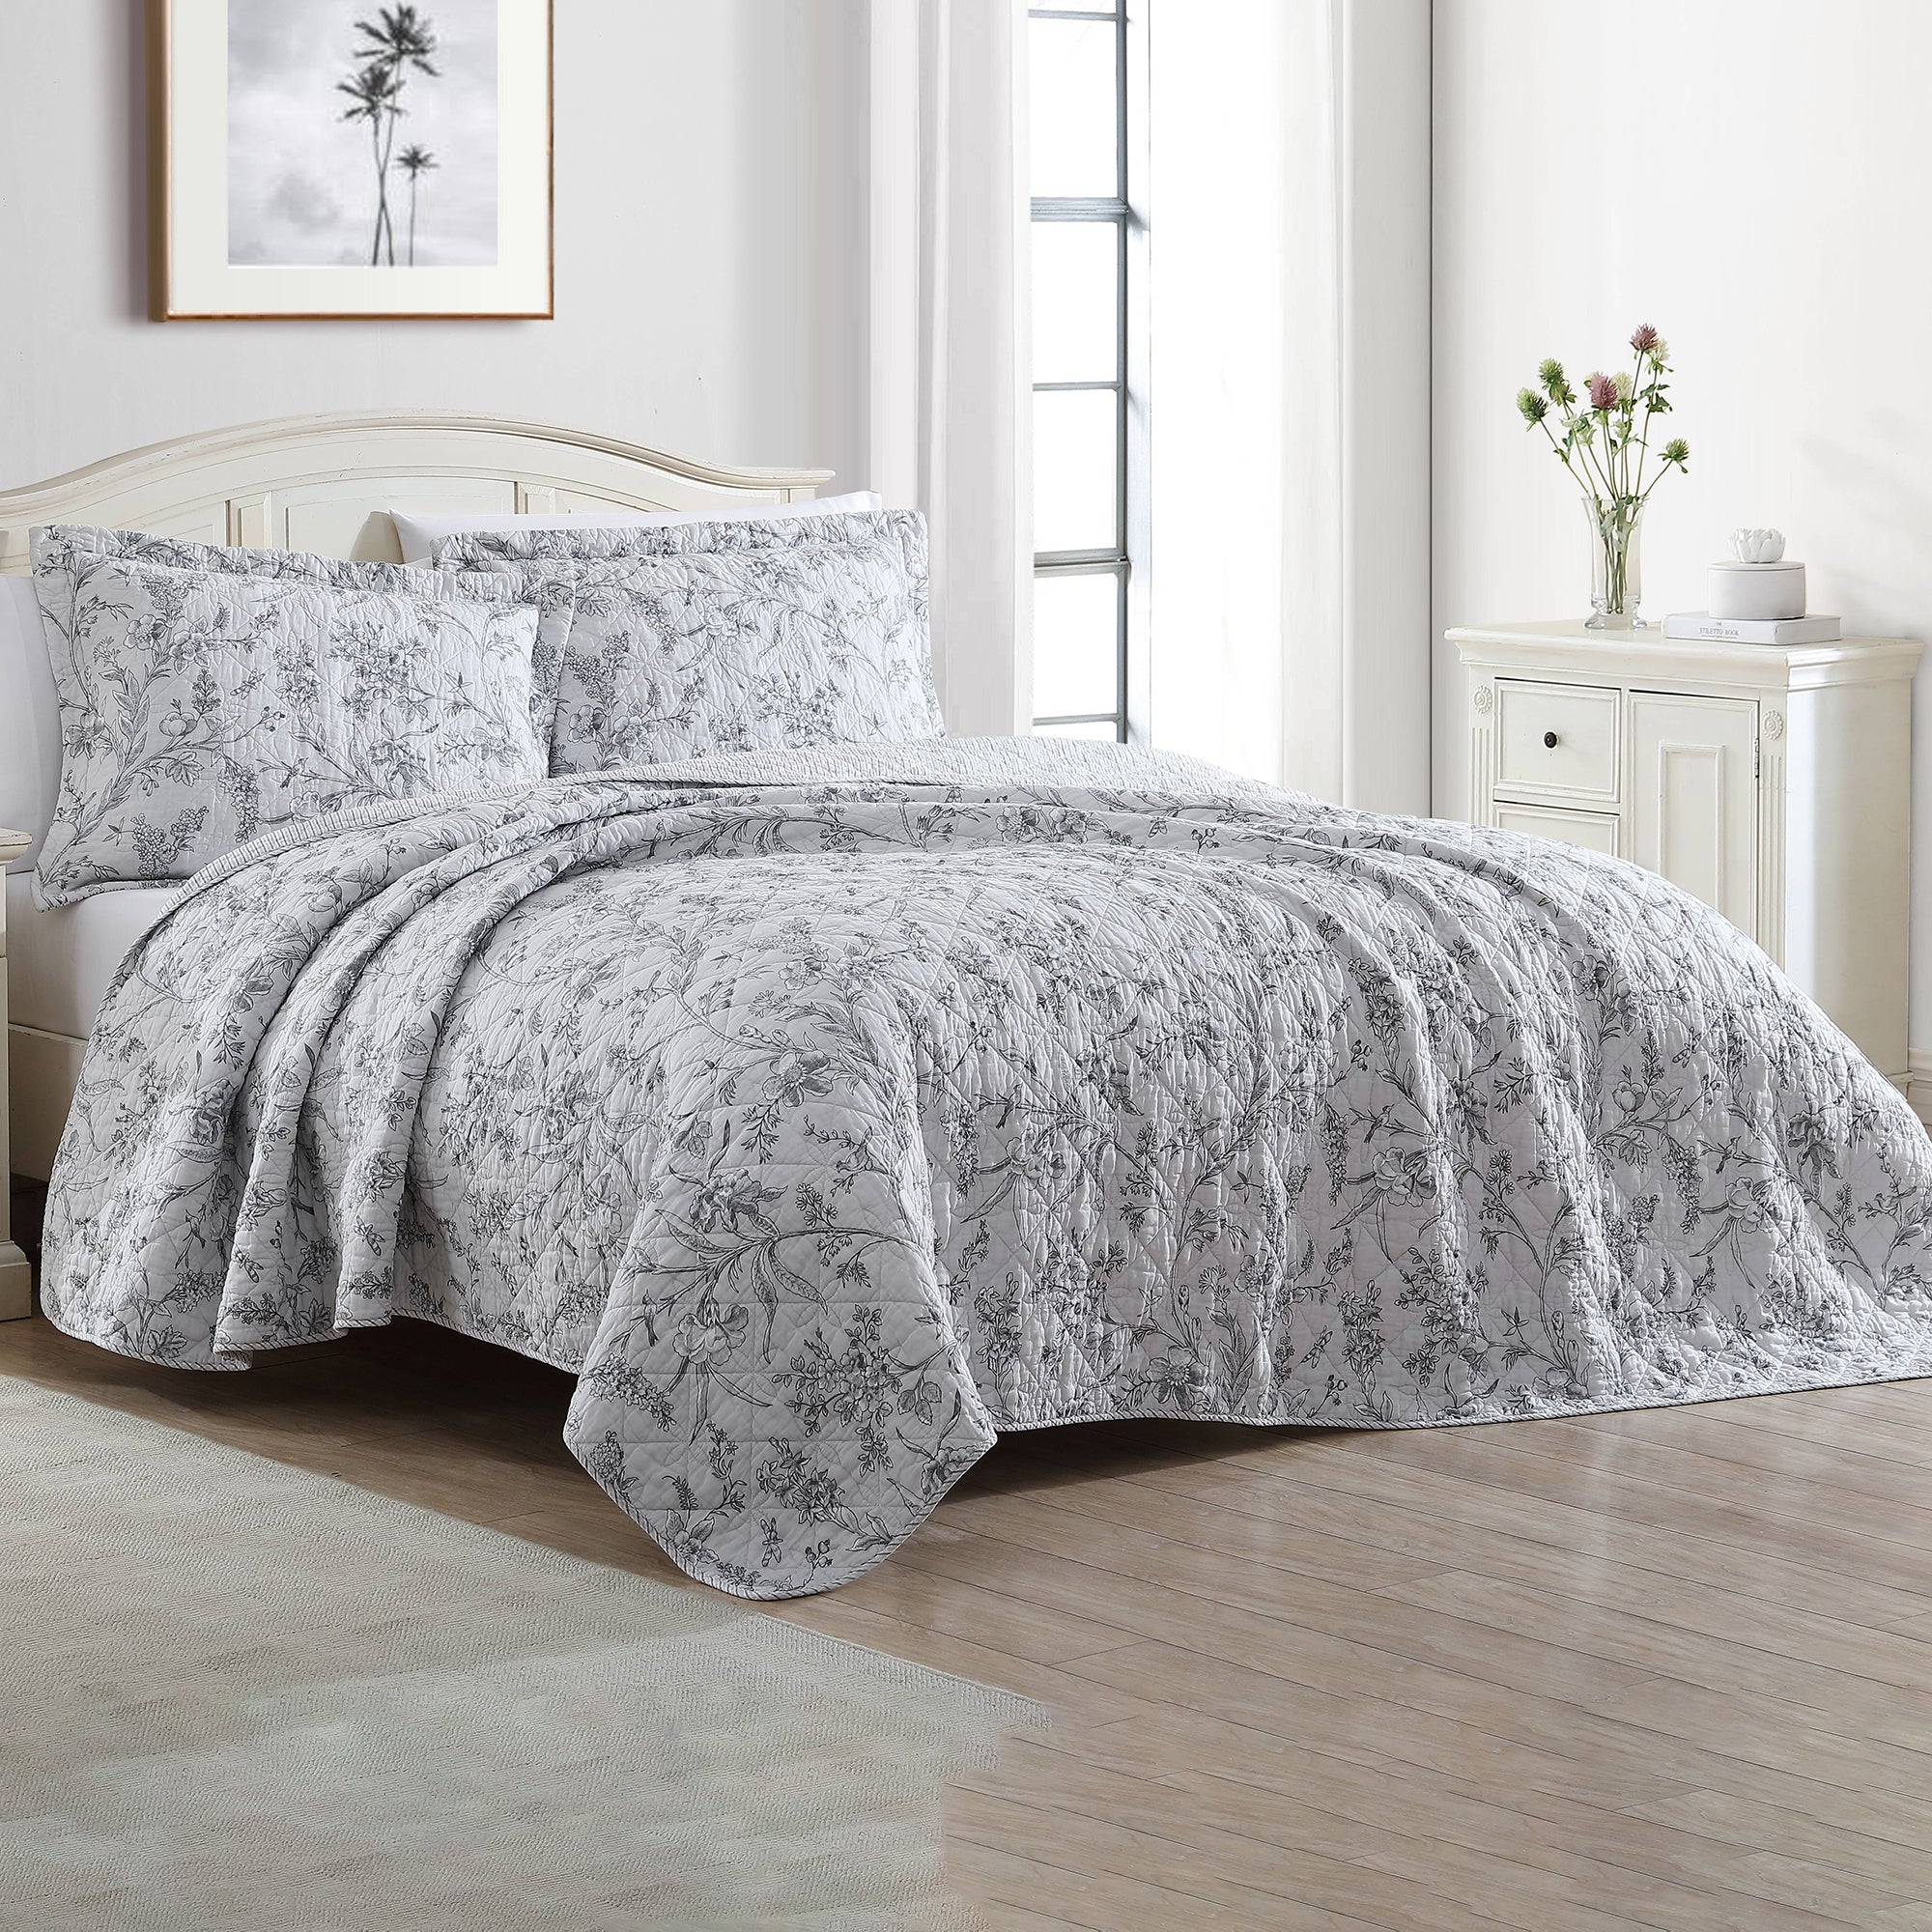 The Branch Toile Coverlet Set Grey by Laura Ashley features a grey floral design on soft white ground which is fully reversible to a delicate pinstripe design, perfect for creating versatile bedroom looks.